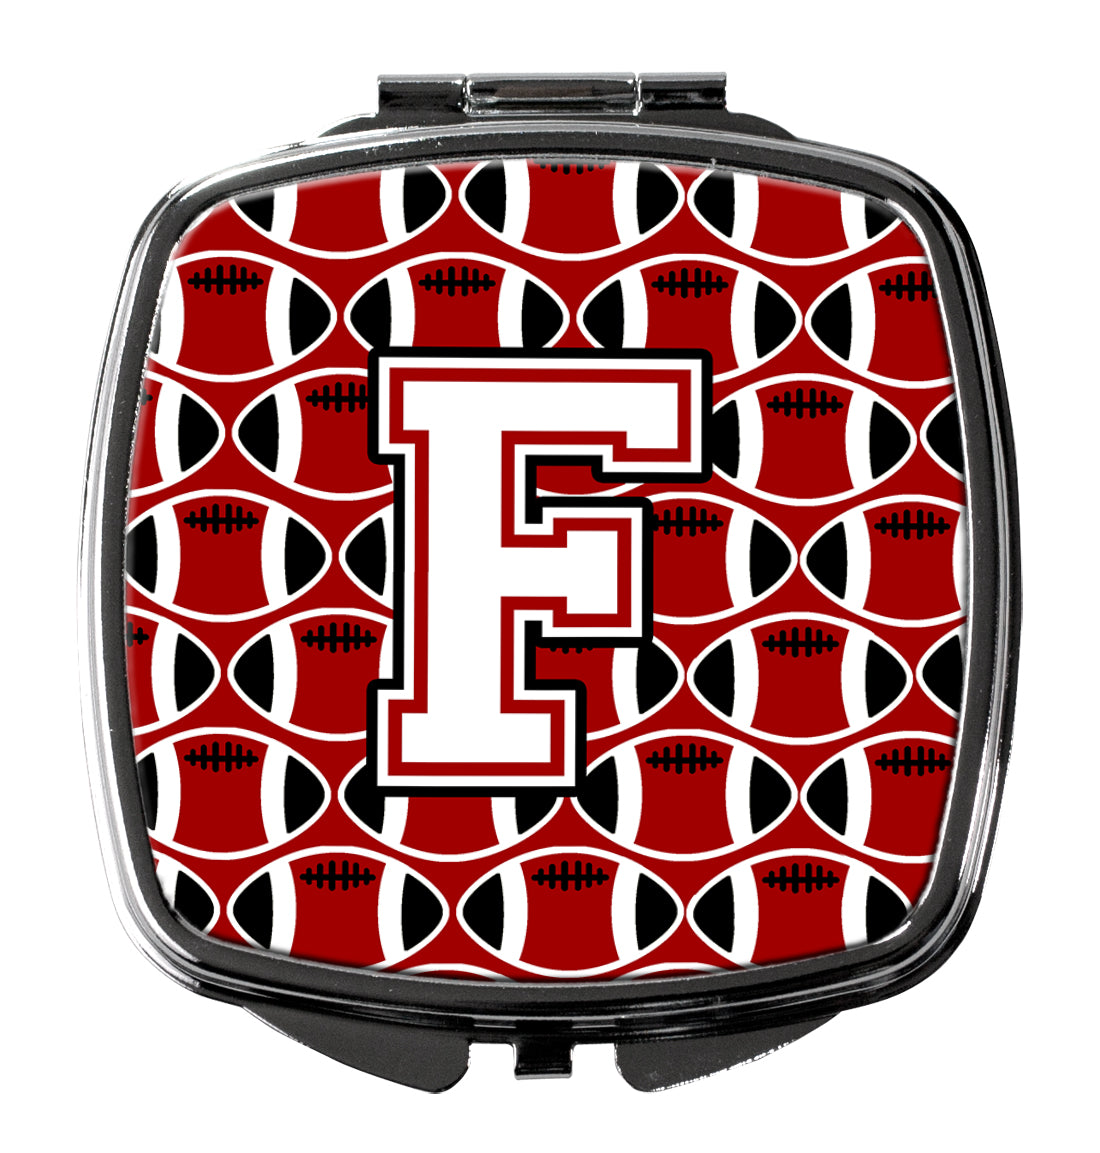 Letter F Football Cardinal and White Compact Mirror CJ1082-FSCM